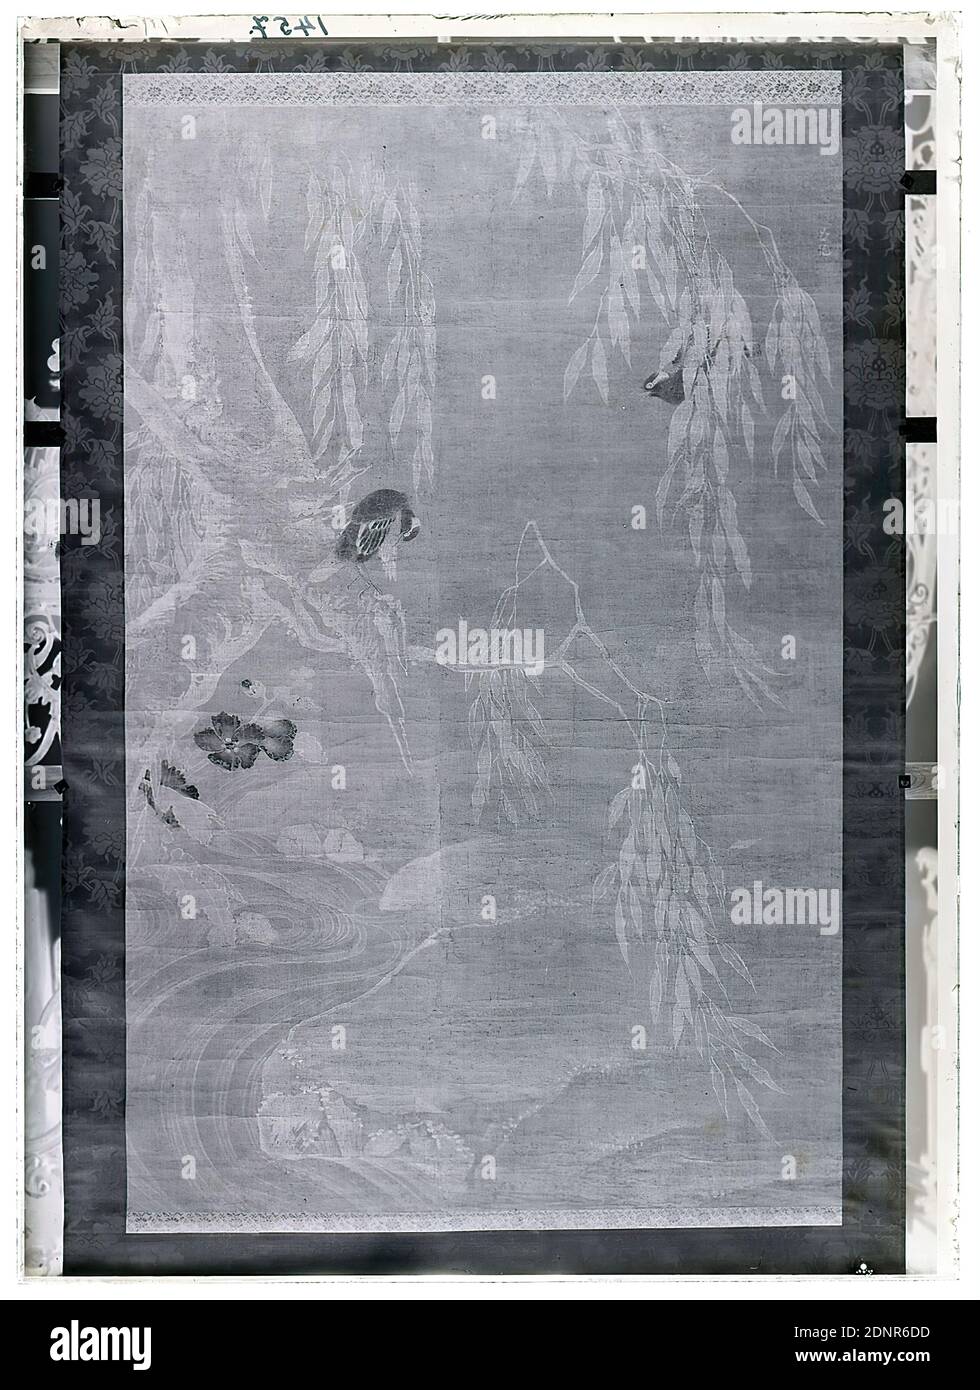 Wilhelm Weimar, Chinese silk scroll painting (Kakemono), glass negative, black and white negative process, total: height: 23.8 cm; width: 17.8 cm, numbered: top left : in black ink: 1457, birds, trees, bushes, brook (watercourse), painting Stock Photo